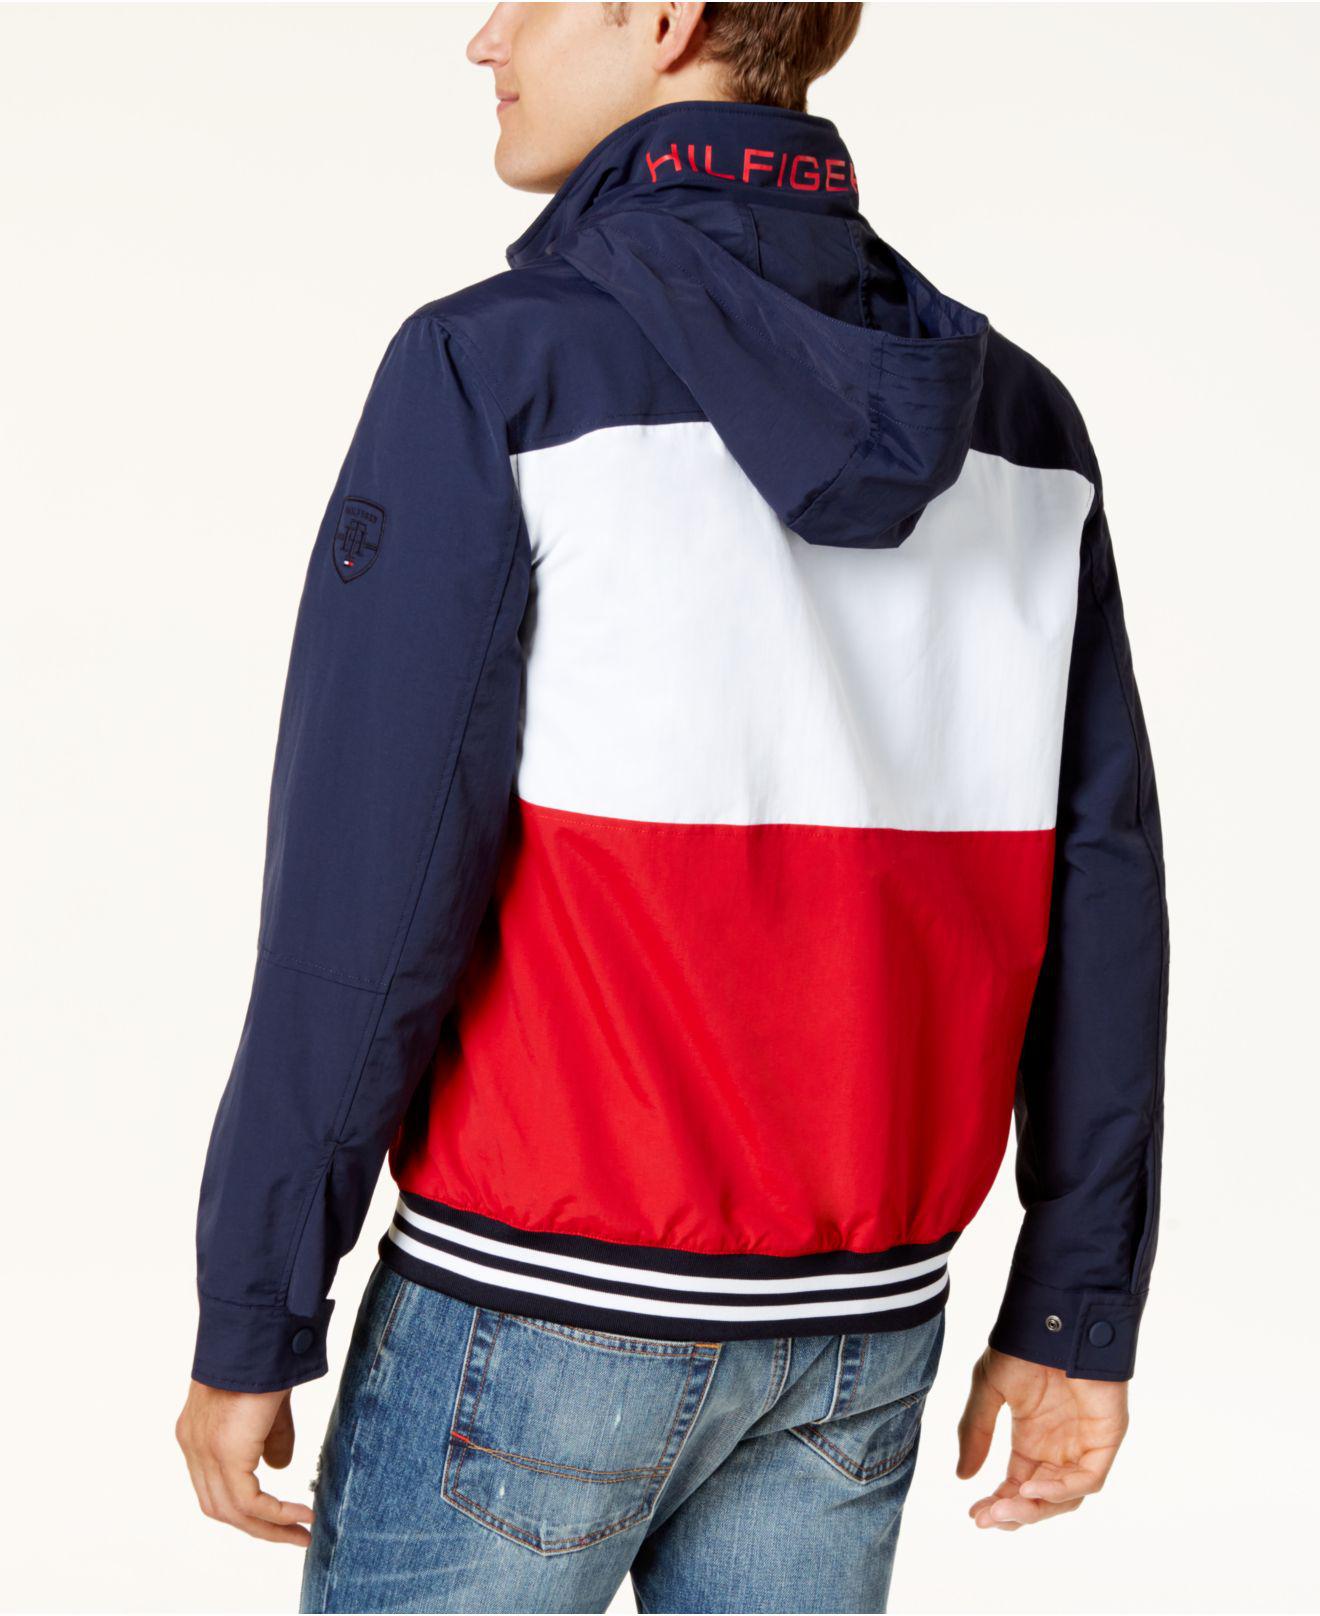 blue and red tommy hilfiger jacket